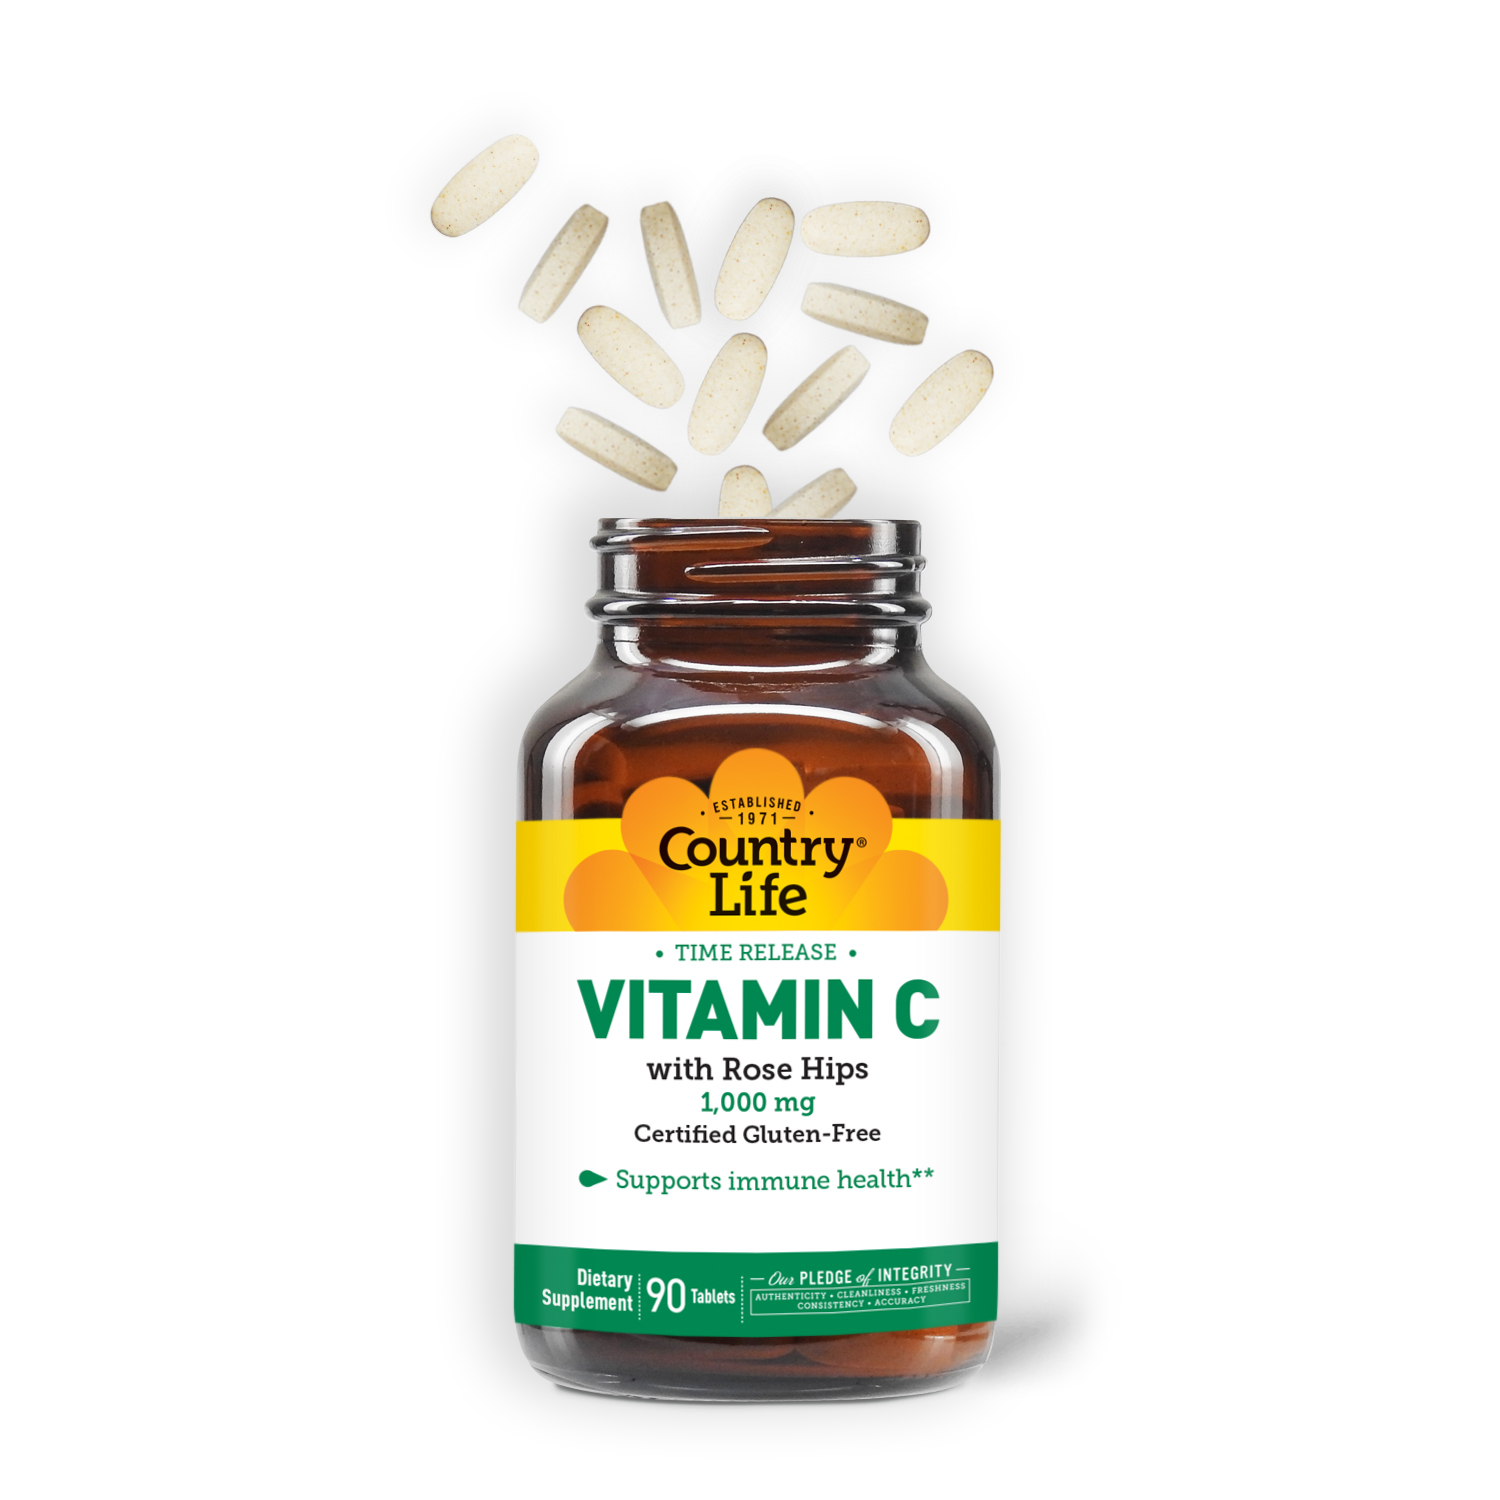 Time Release Vitamin C with Rose Hips